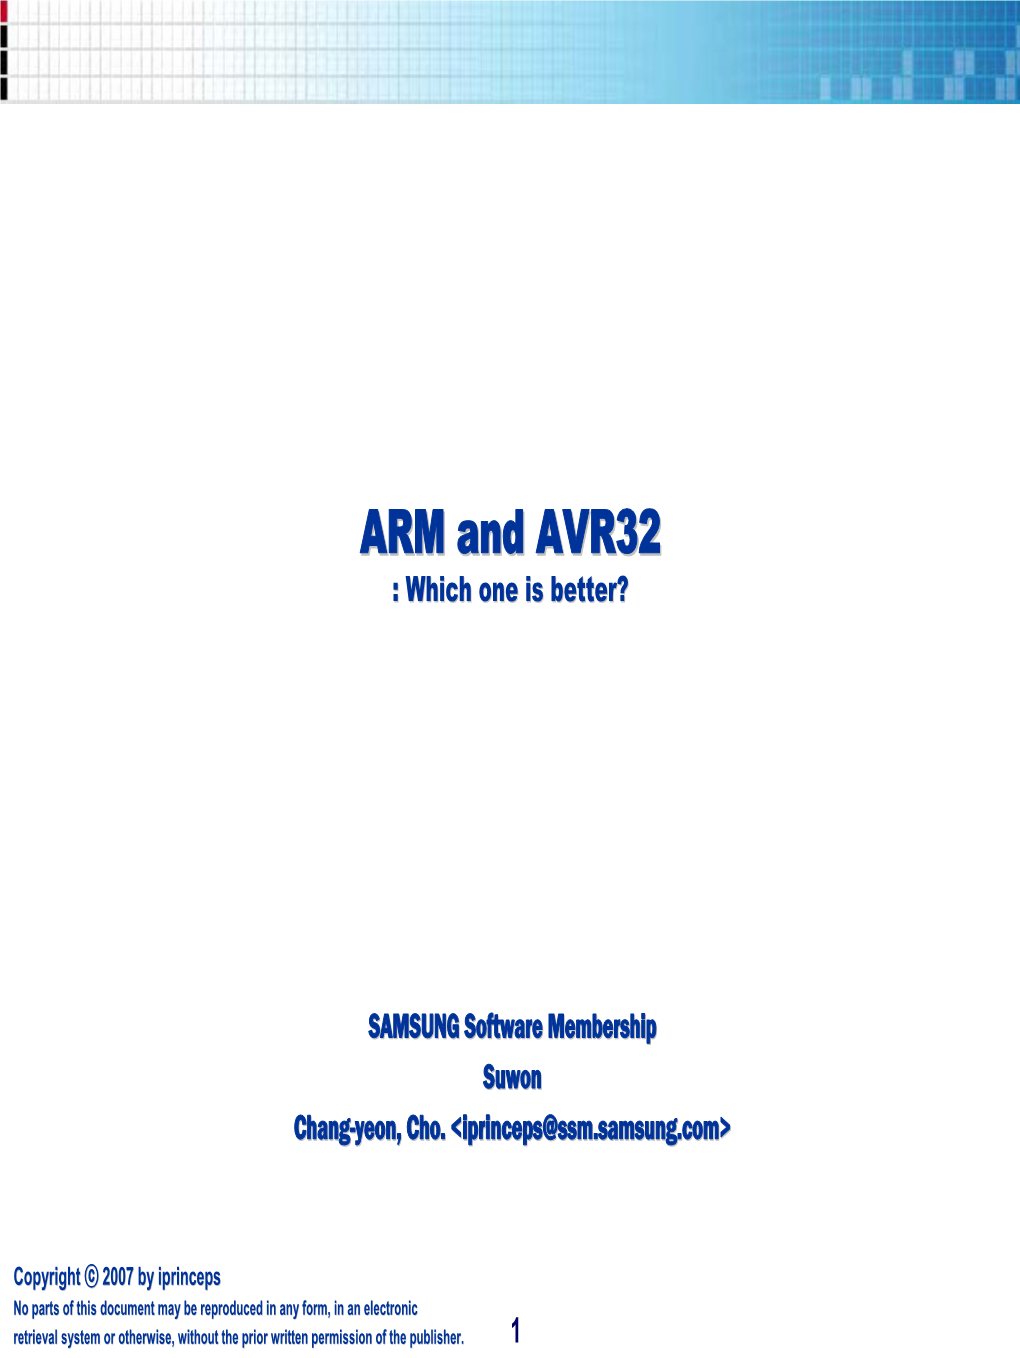 ARM and AVR32 : Which One Is Better?